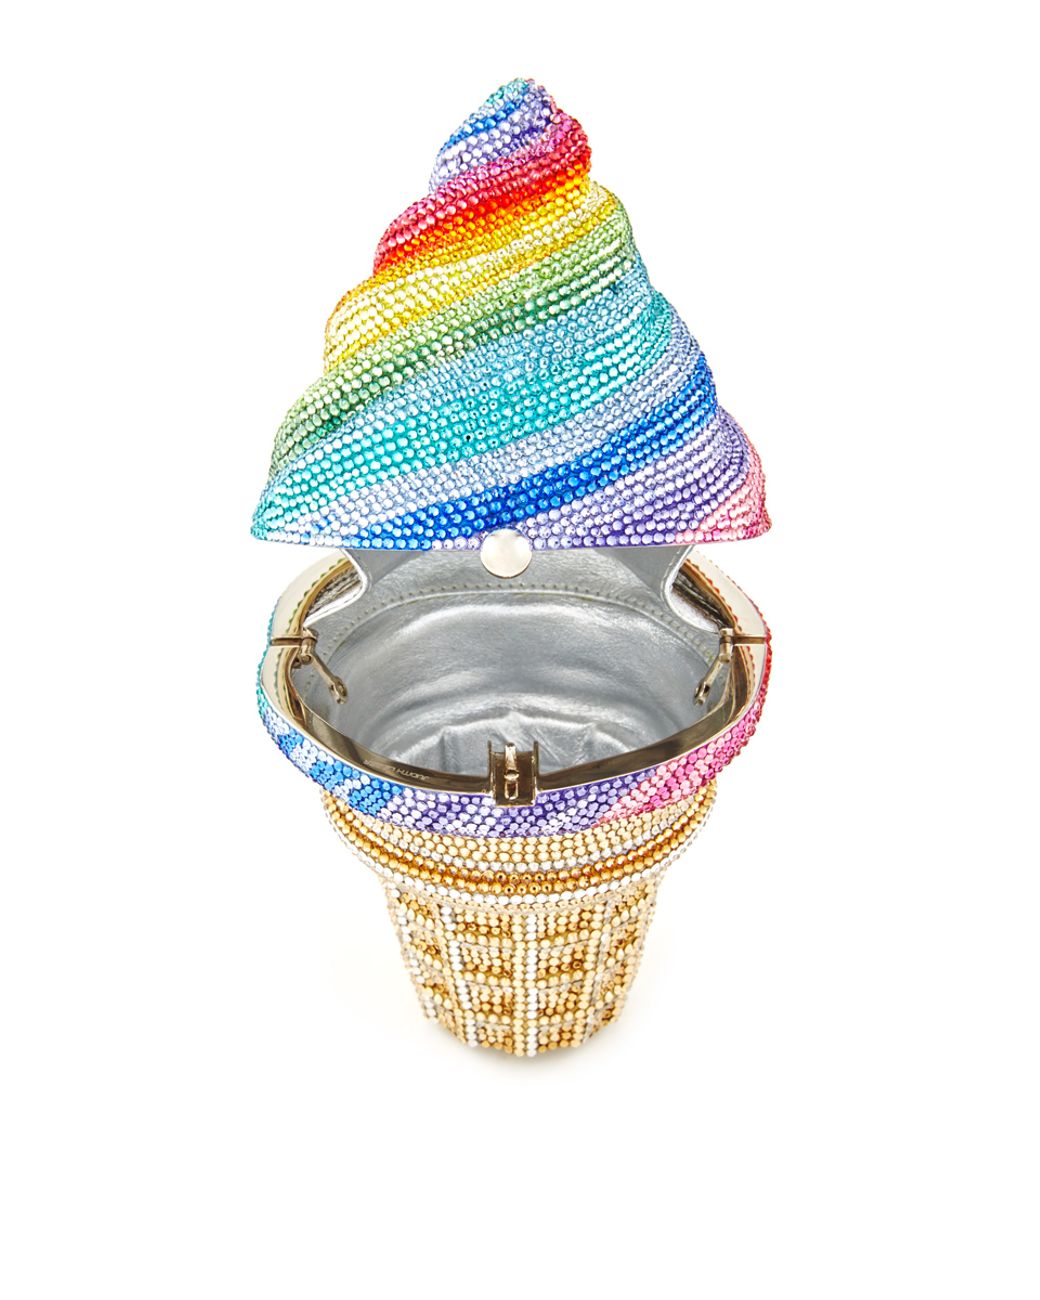 Judith Leiber Couture French Fries Rainbow Clutch Bag  Judith leiber  couture, Rainbow clutches, Judith leiber